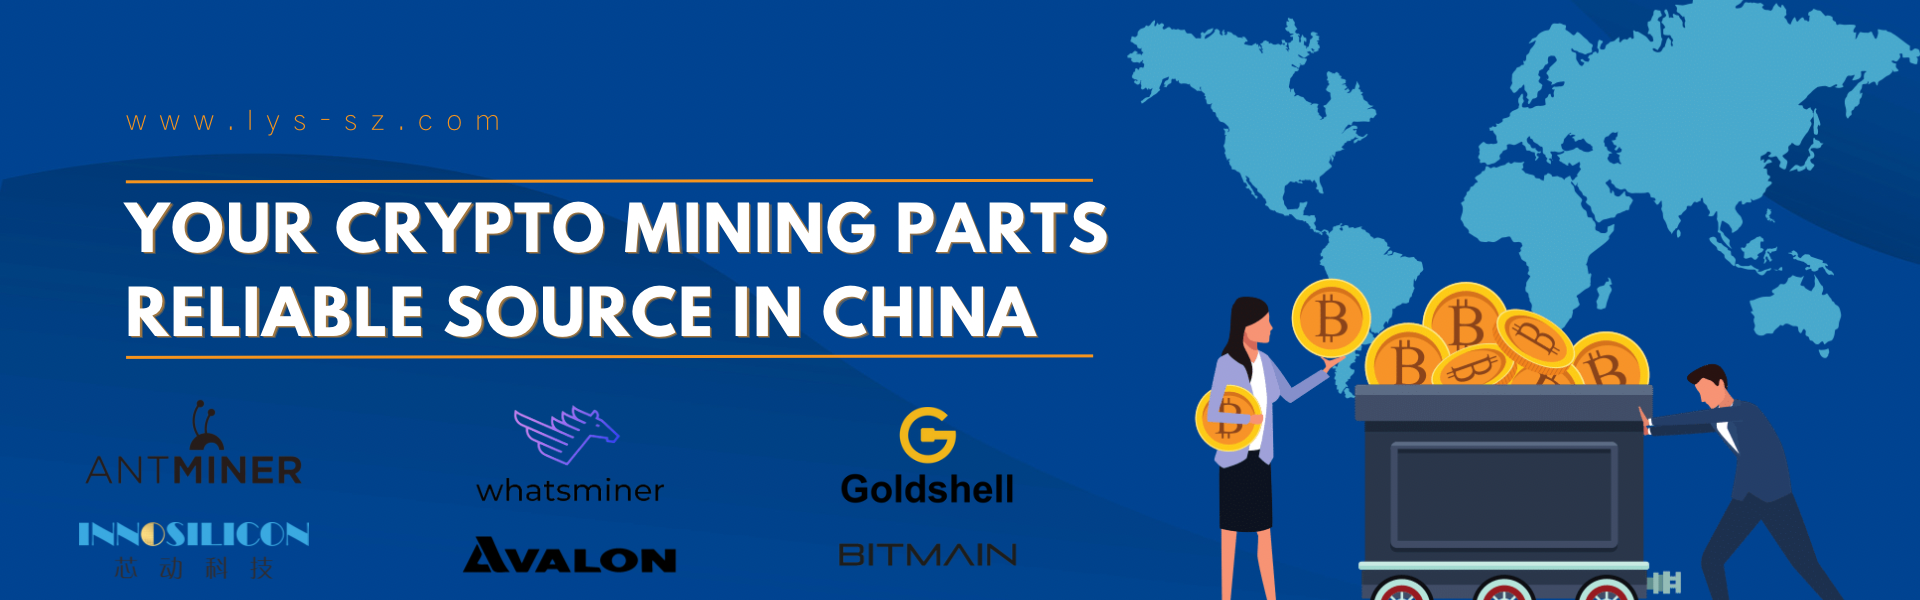 crypto mining asic miner bitcoin supplier reliable source in shenzhen china